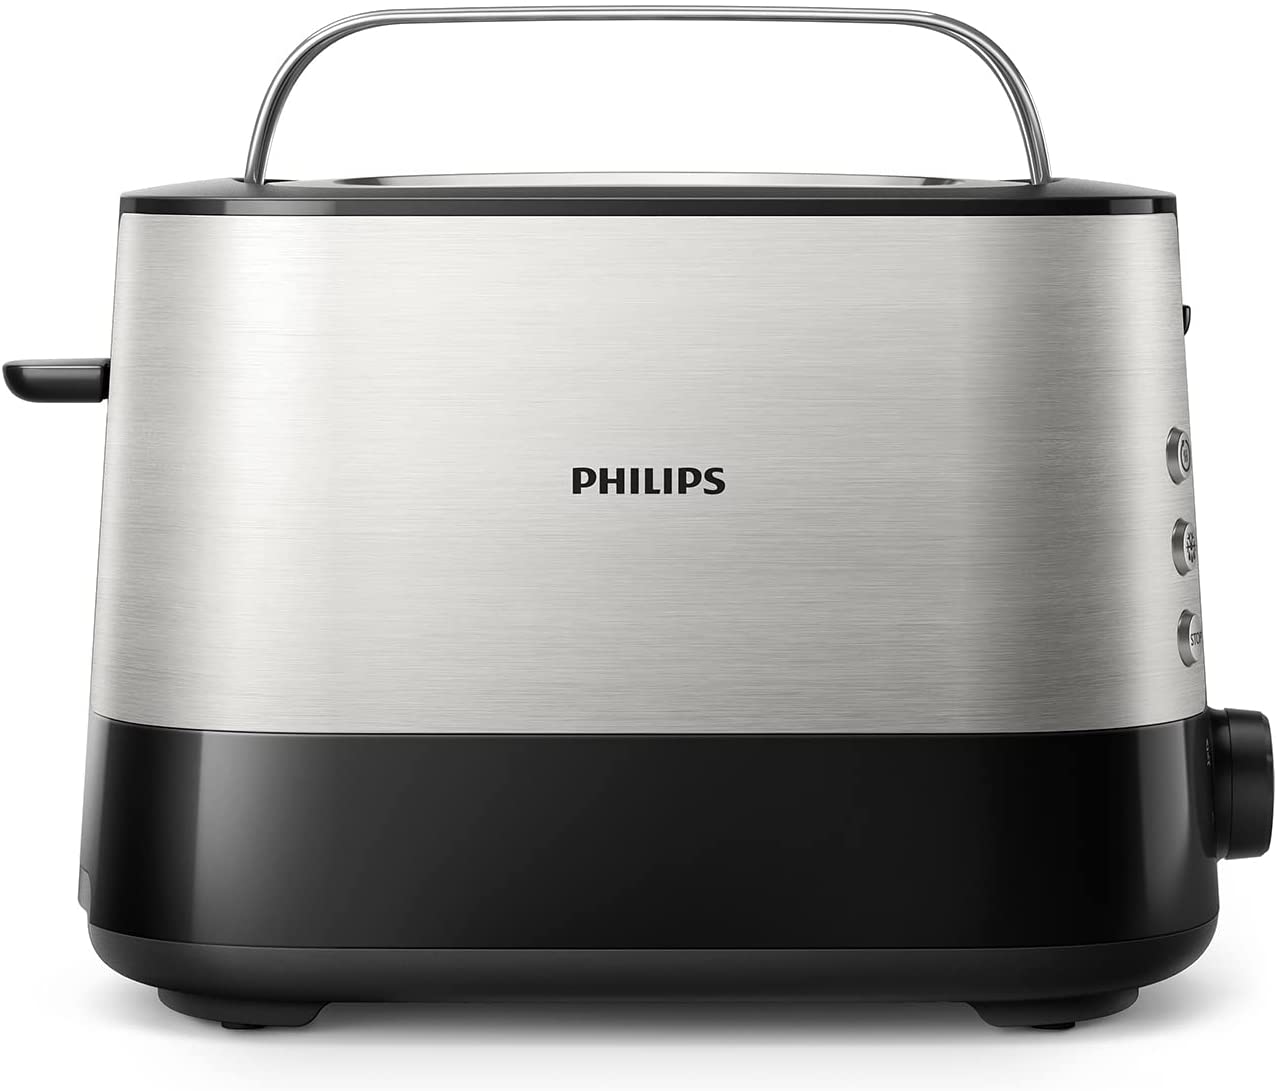 Philips Domestic Appliances Philips HD2637 Toaster - 7 Levels, Bun Warmer, Stop Button, 1000 W, Toaster